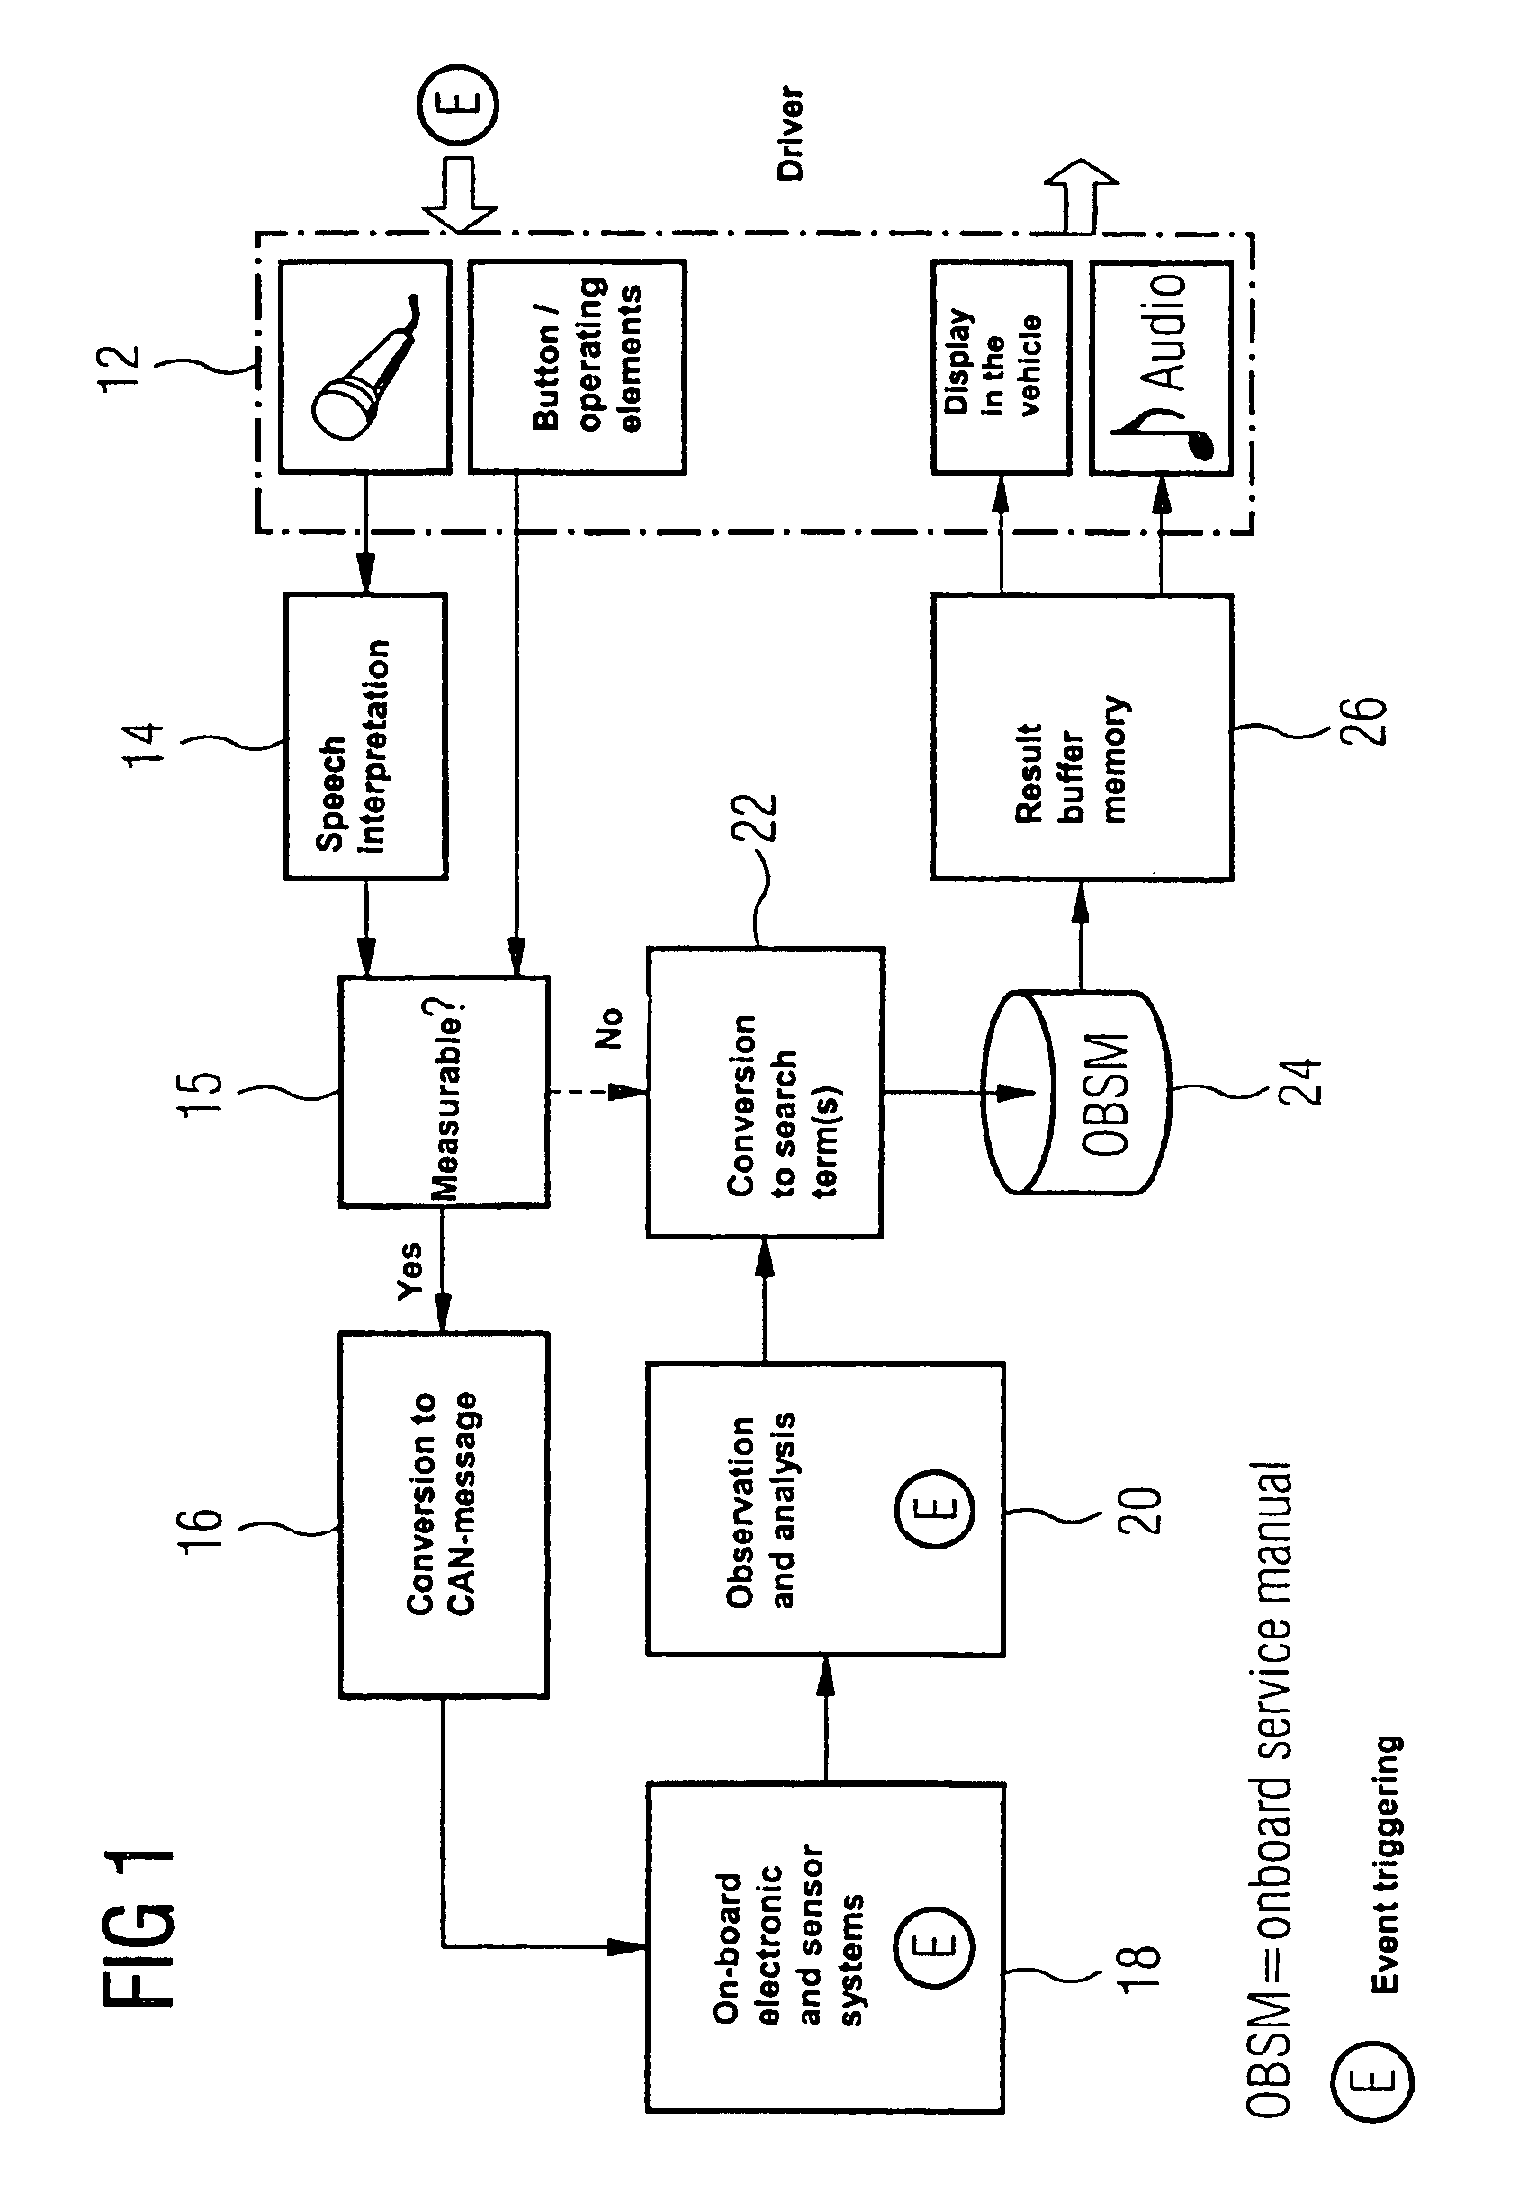 Method and device for interpreting events and outputting operating instructions in motor vehicles